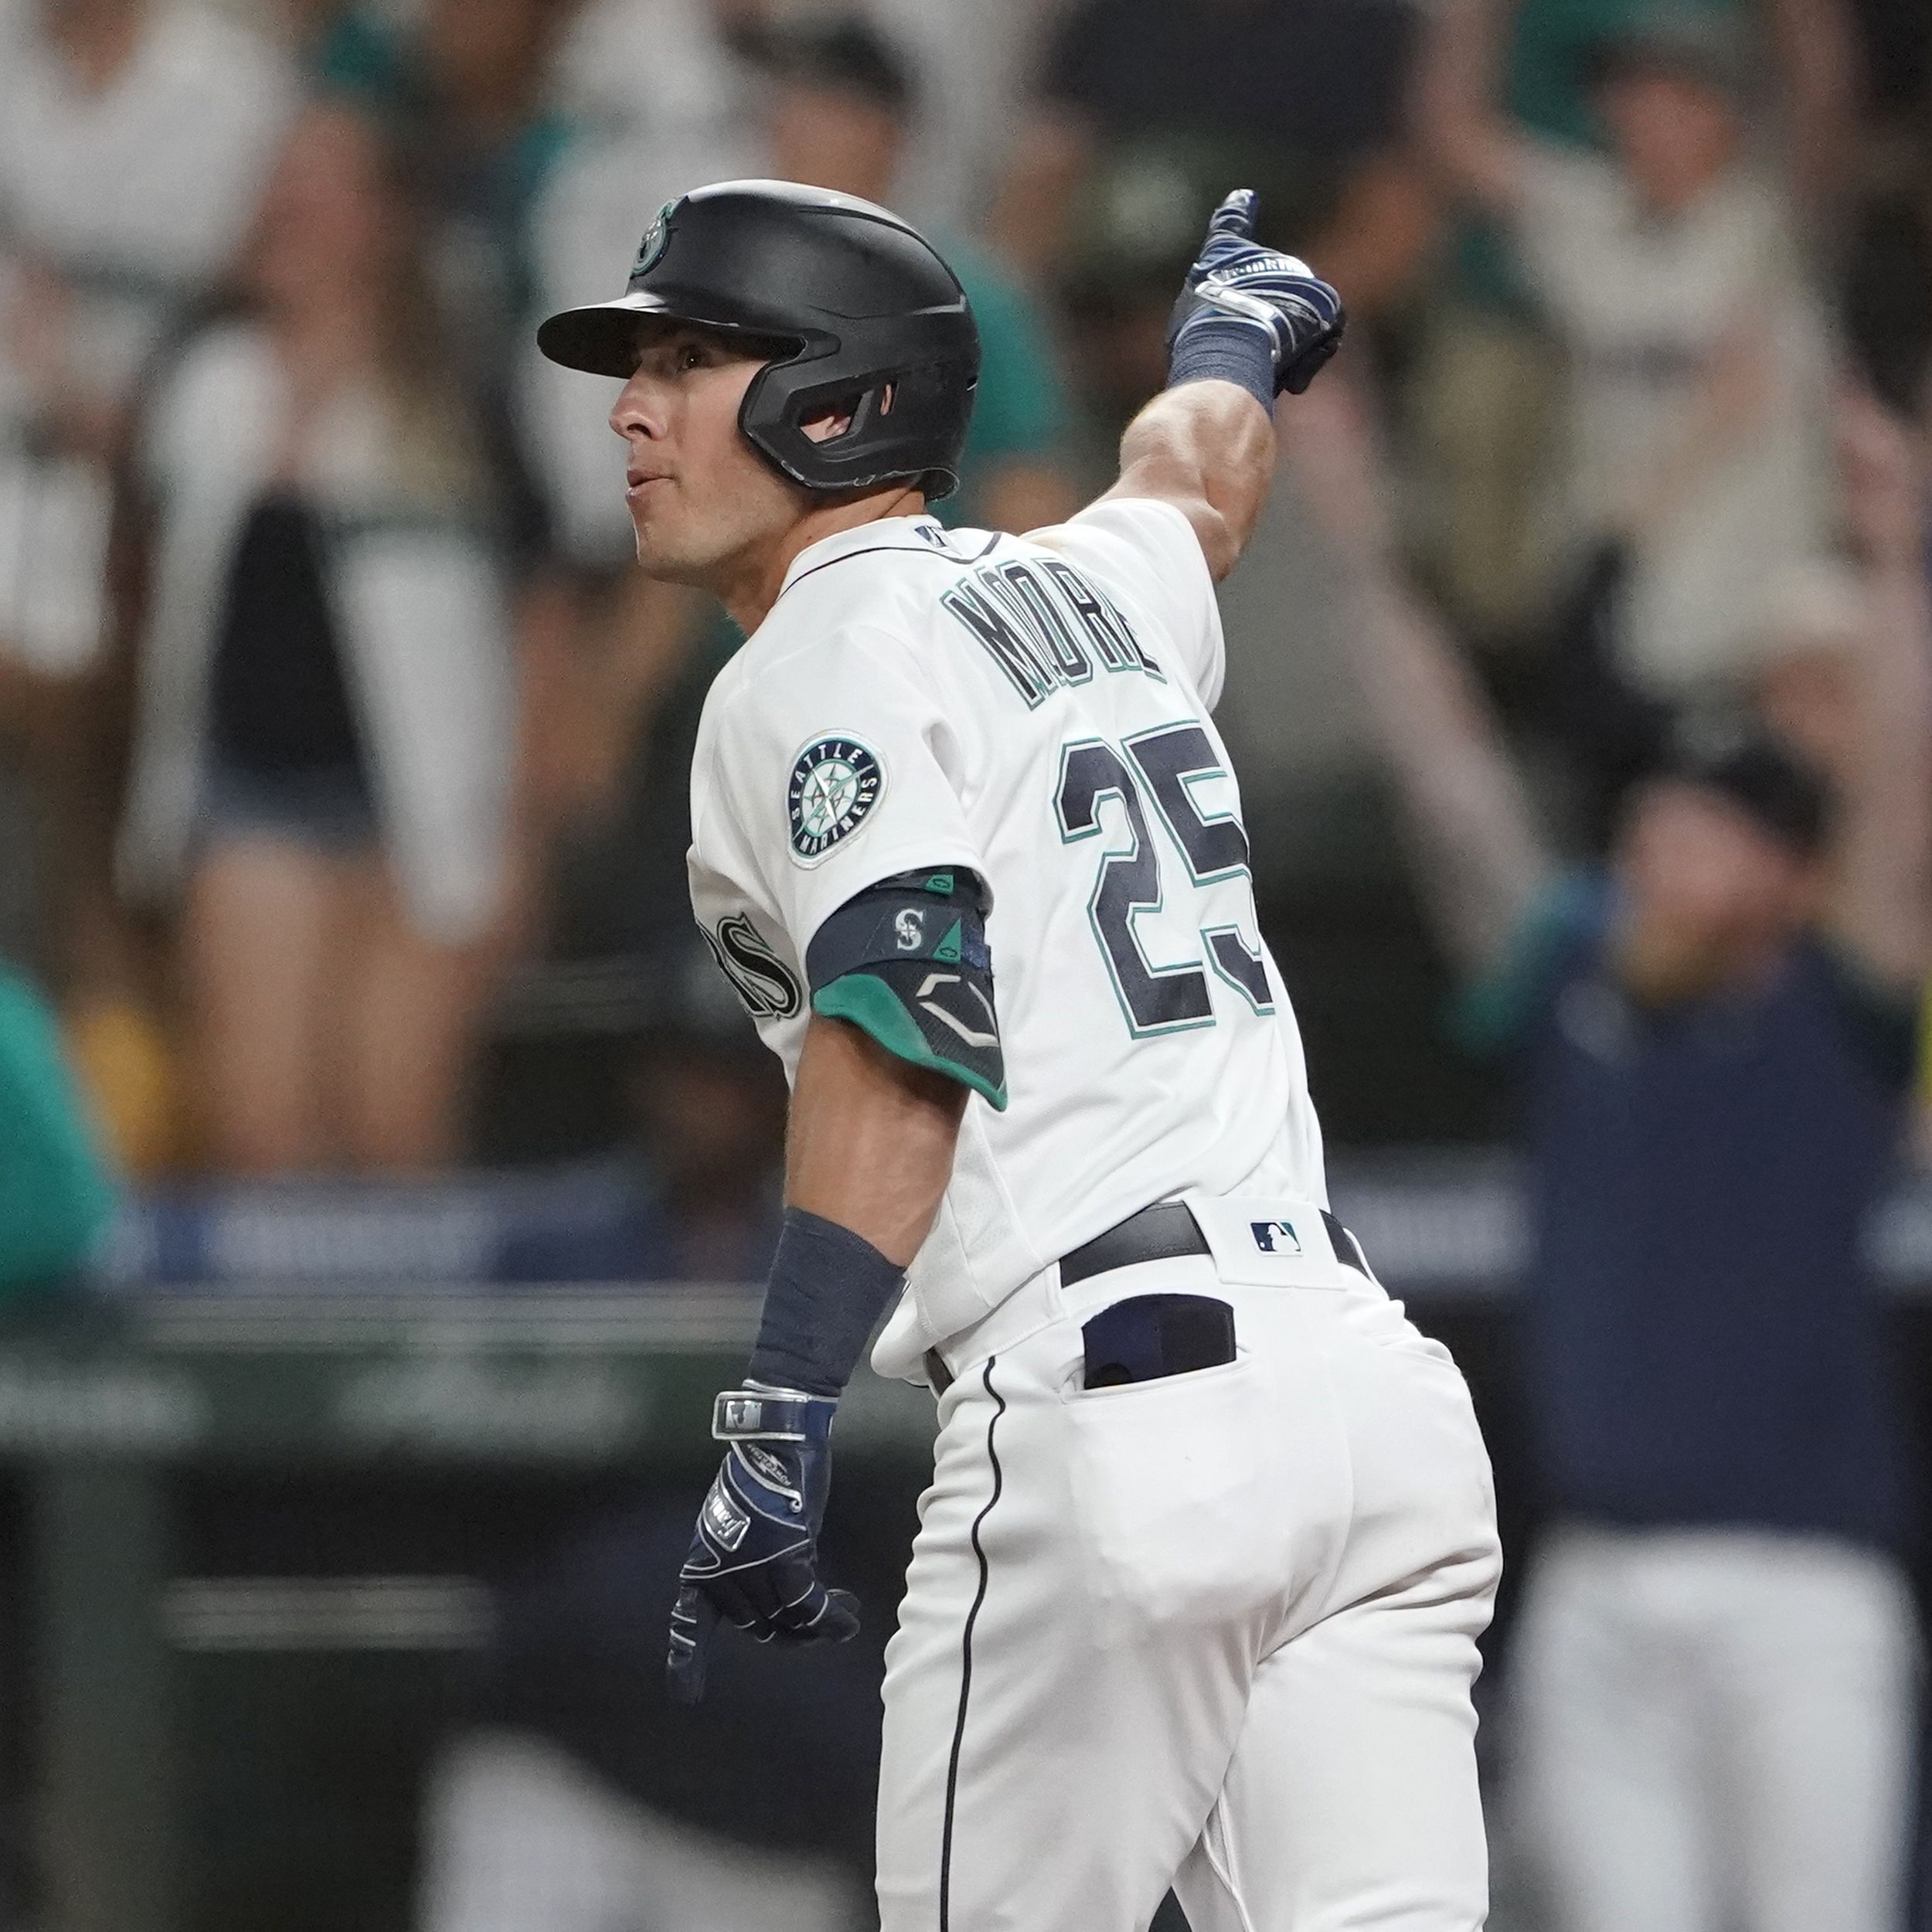 After another September loss, the Mariners' season is slip-sliding